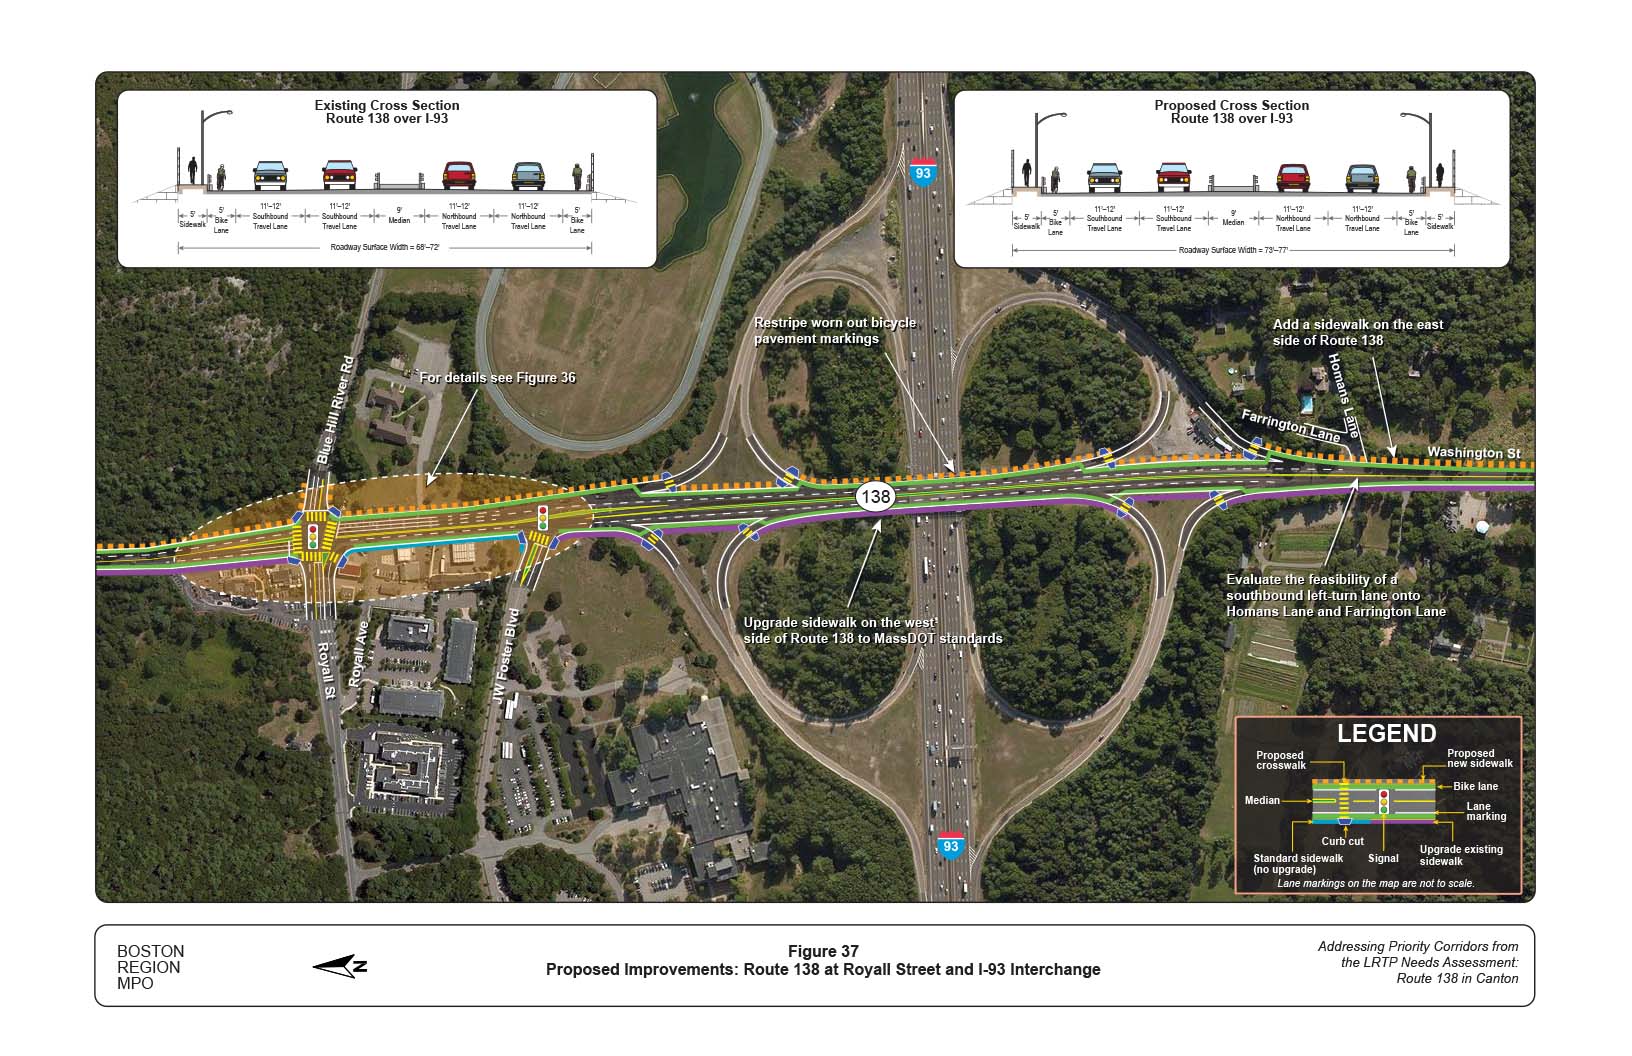 Figure 37 is map of Route 138 at the Interstate 93 interchange and Royall Street with overlays showing the proposed improvements to the roadway and graphics of the current and proposed cross section of the roadway.